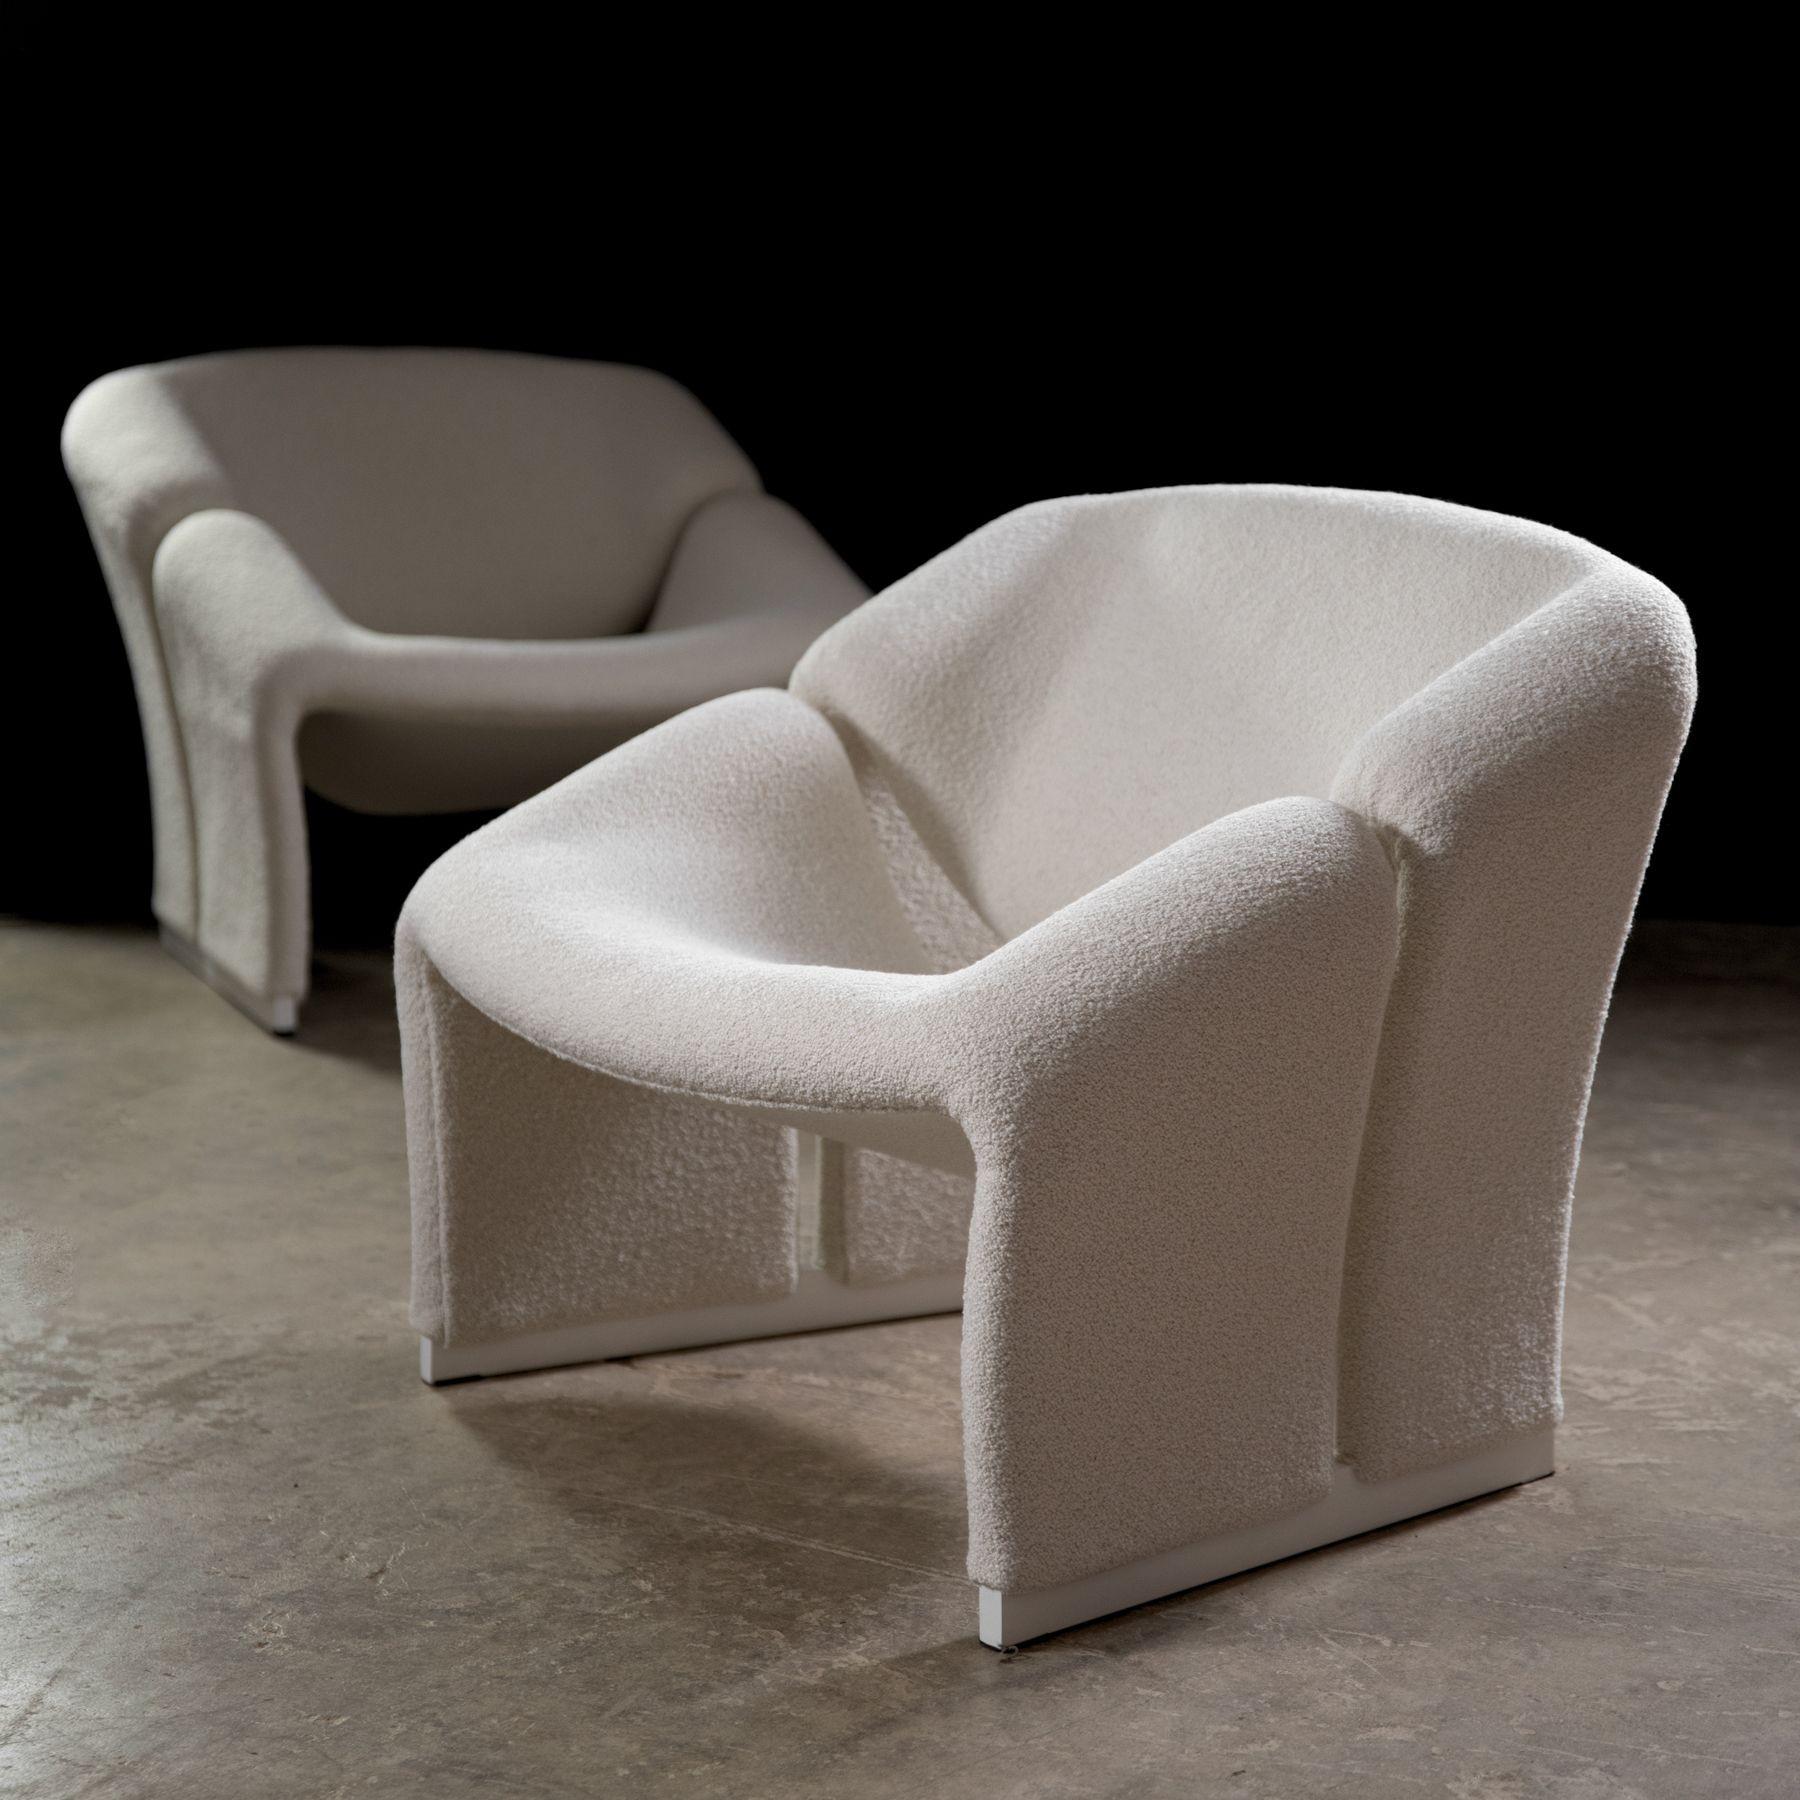 Pair of first edition Pierre Paulin F580 chairs in a soft white Italian Boucle. Fully restored with new foam and new fabric. Our upholstery team approaches these chairs like a master tailor. They are exceptionally well restored and will undoubtedly